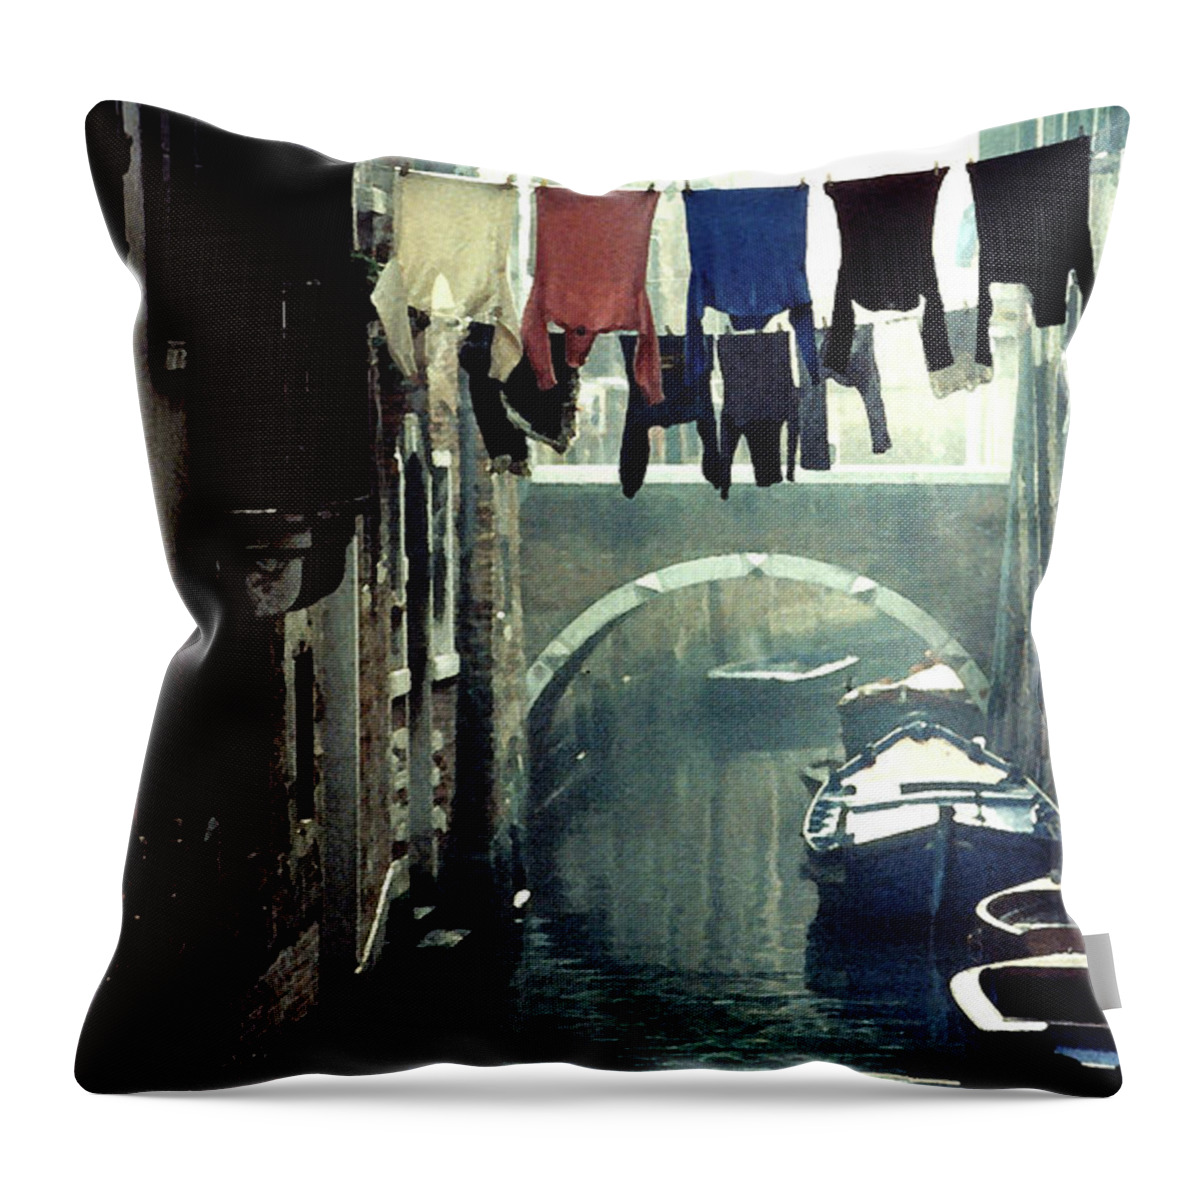 Italy Throw Pillow featuring the photograph Washday in Venice Italy by Wayne King